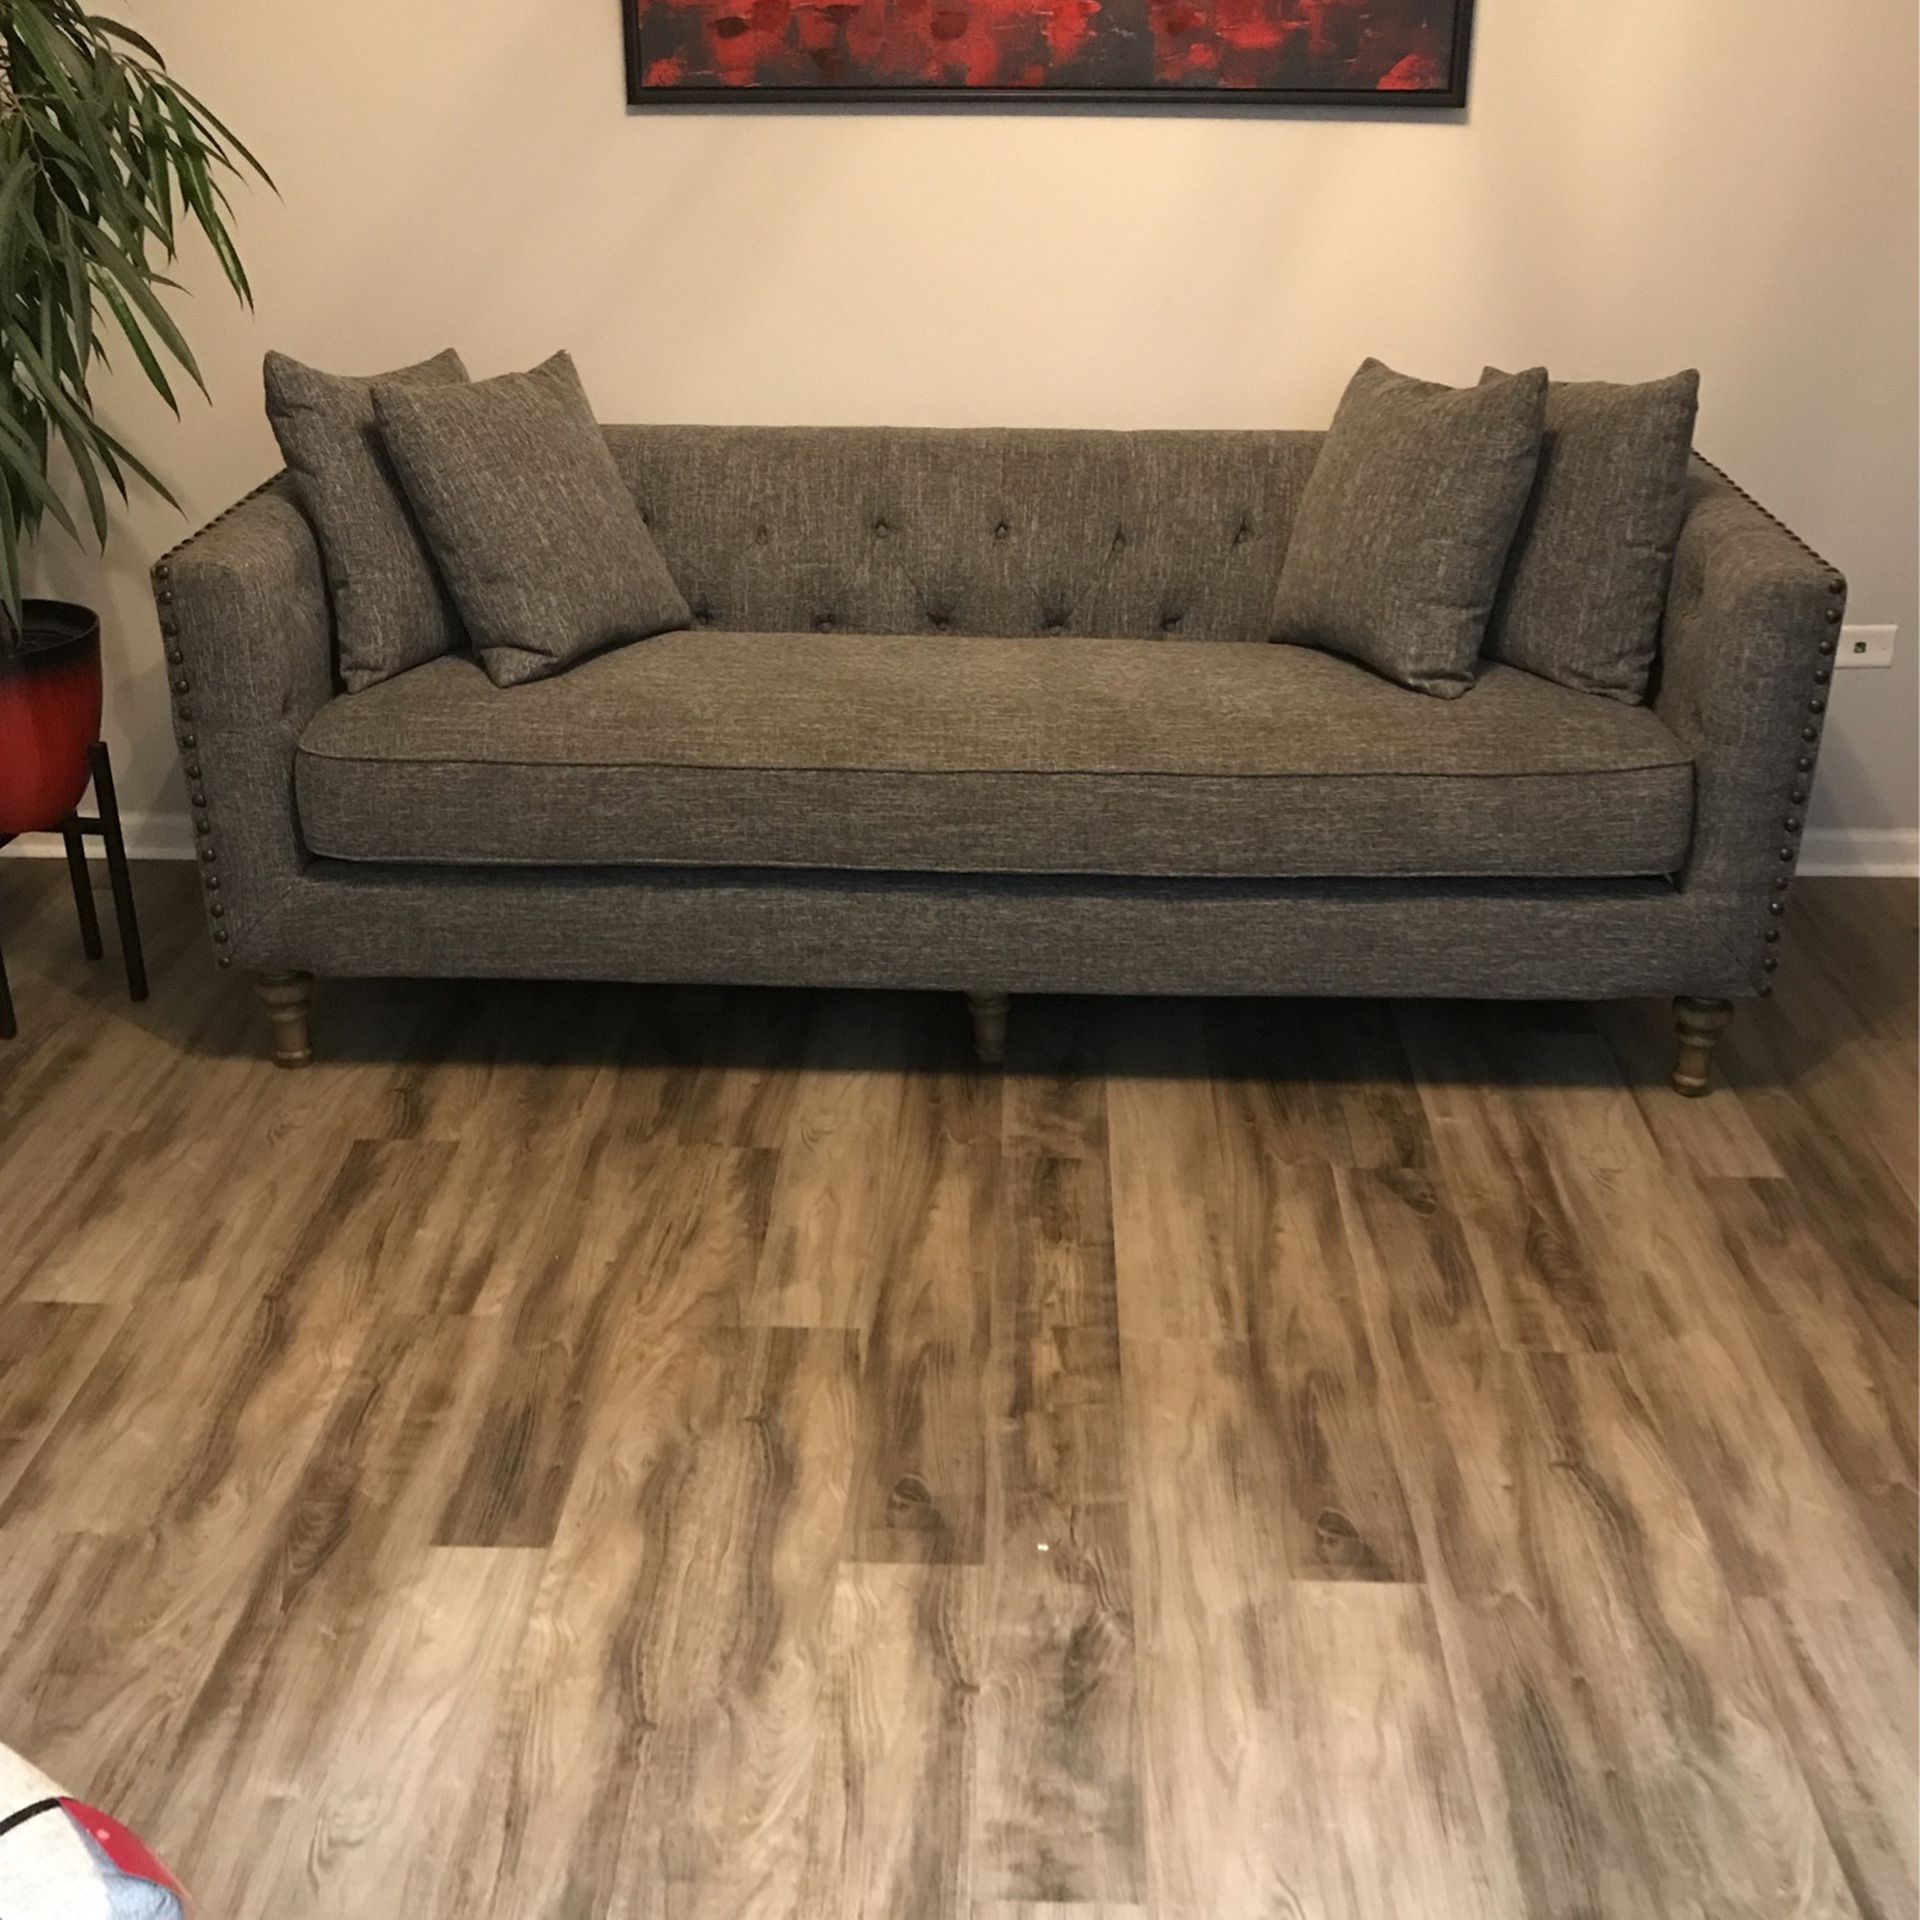 Sofa And Chair For Sale